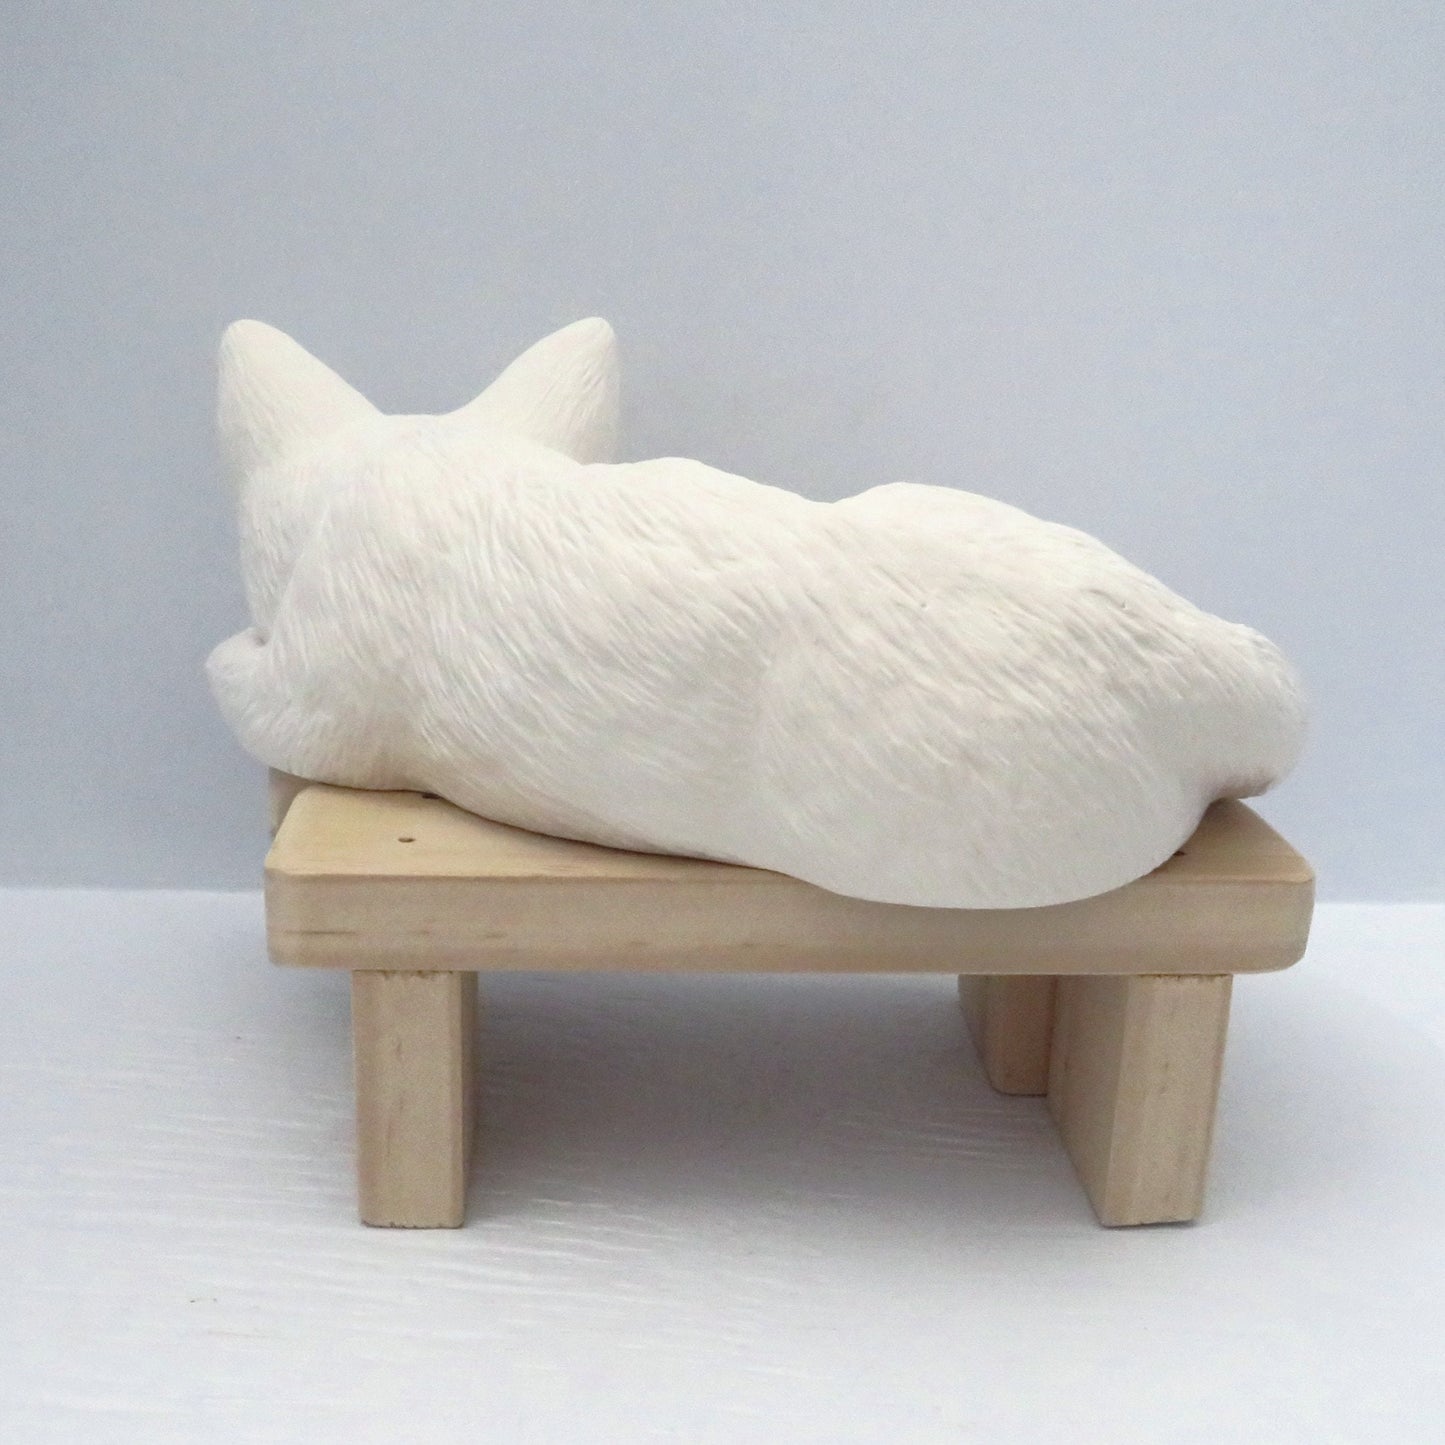 Large Unpainted Ceramic Cat Lying Down / Bisque Cat Figurine / Ready to Paint Resting Cat Statue / Ceramics to Paint / Paintable Ceramic Cat / Cat Lover Gift